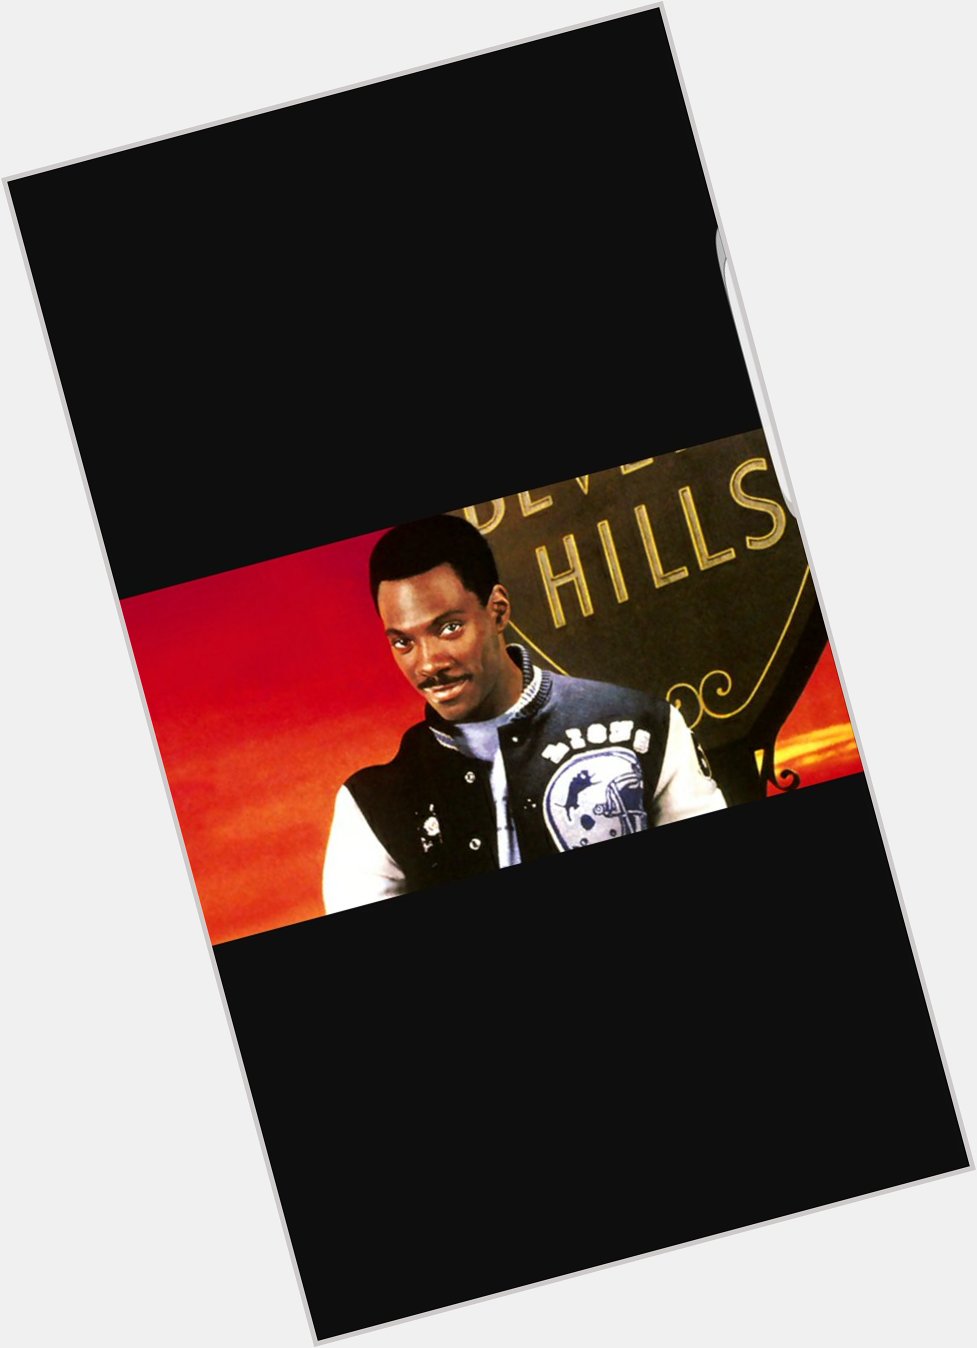 Happy birthday to my all-time favorite comedian Eddie Murphy. 